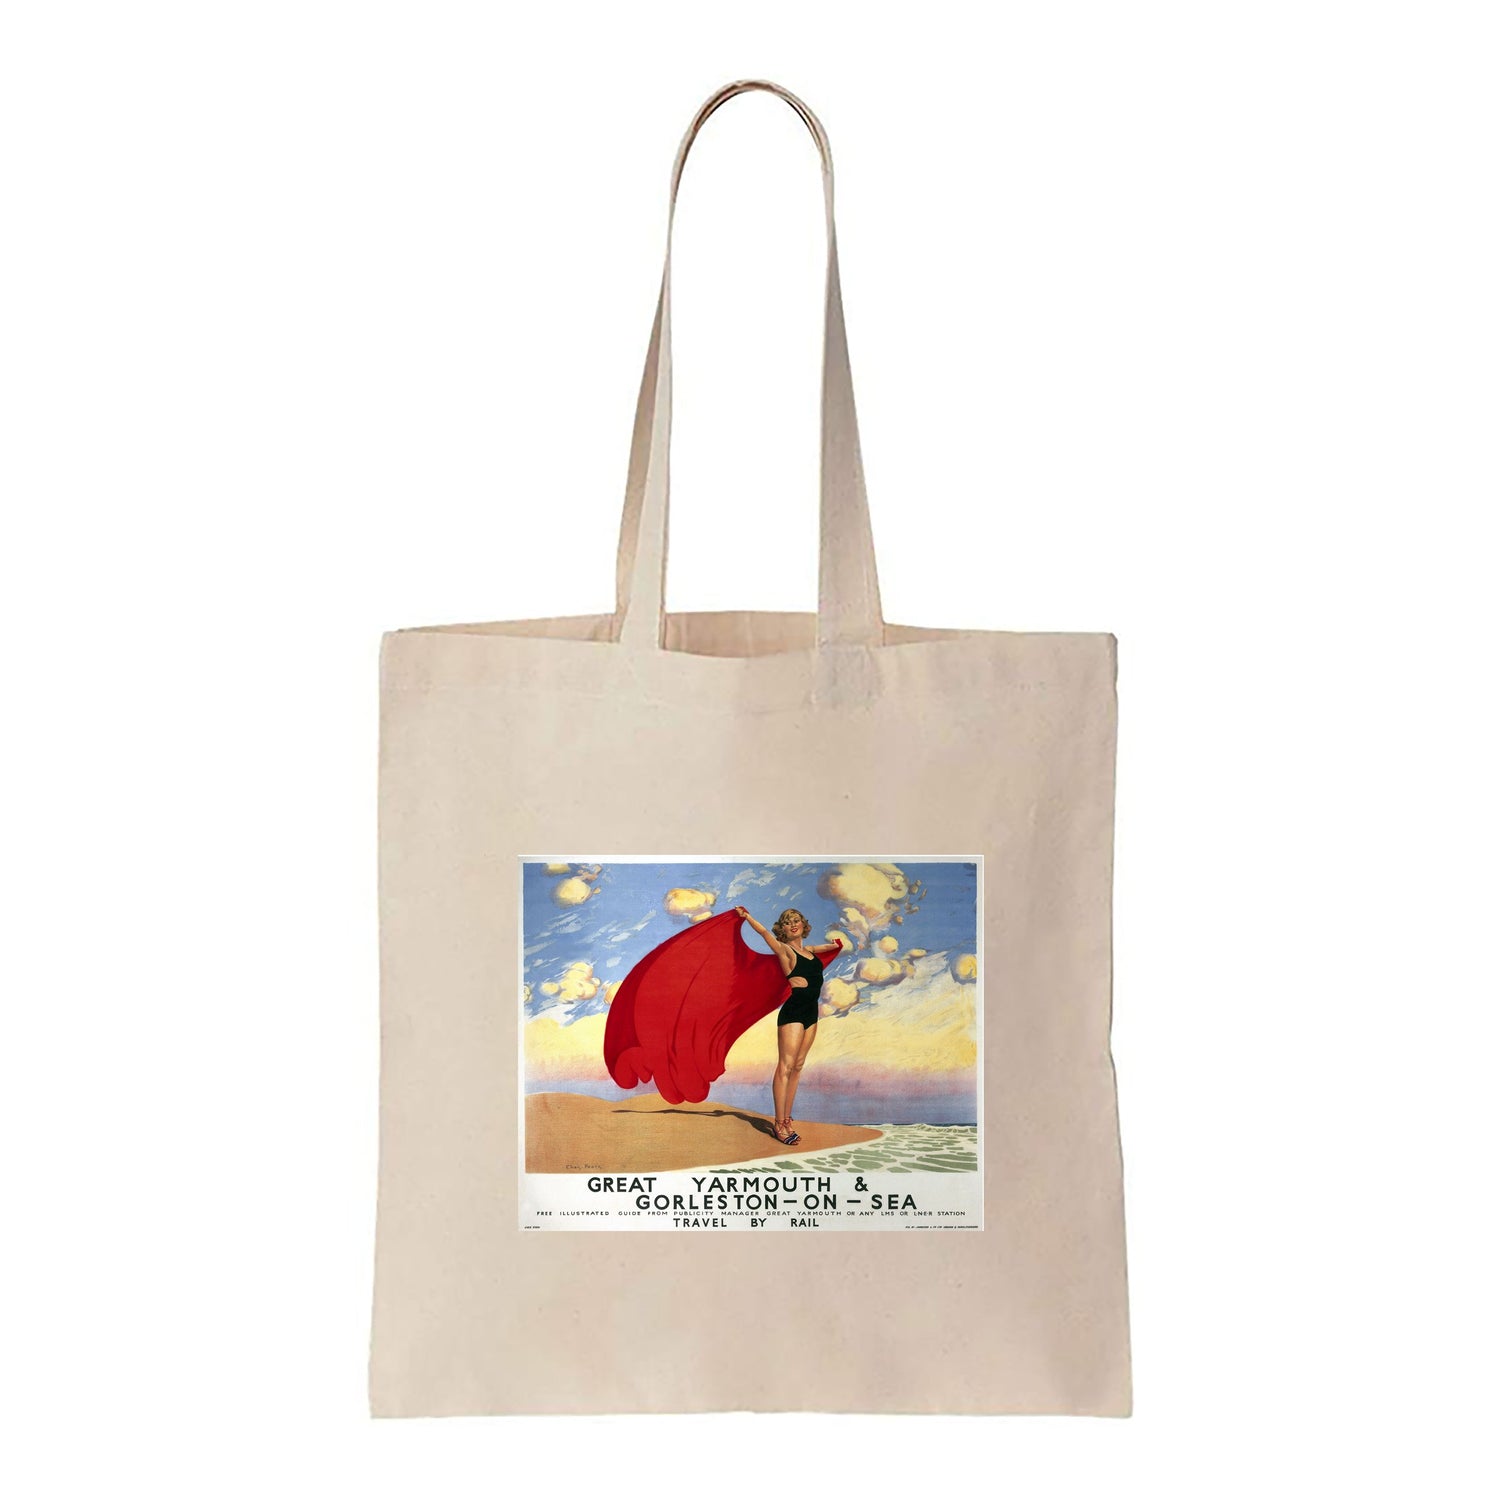 Great Yarmouth Girl with Red Blanket - Canvas Tote Bag